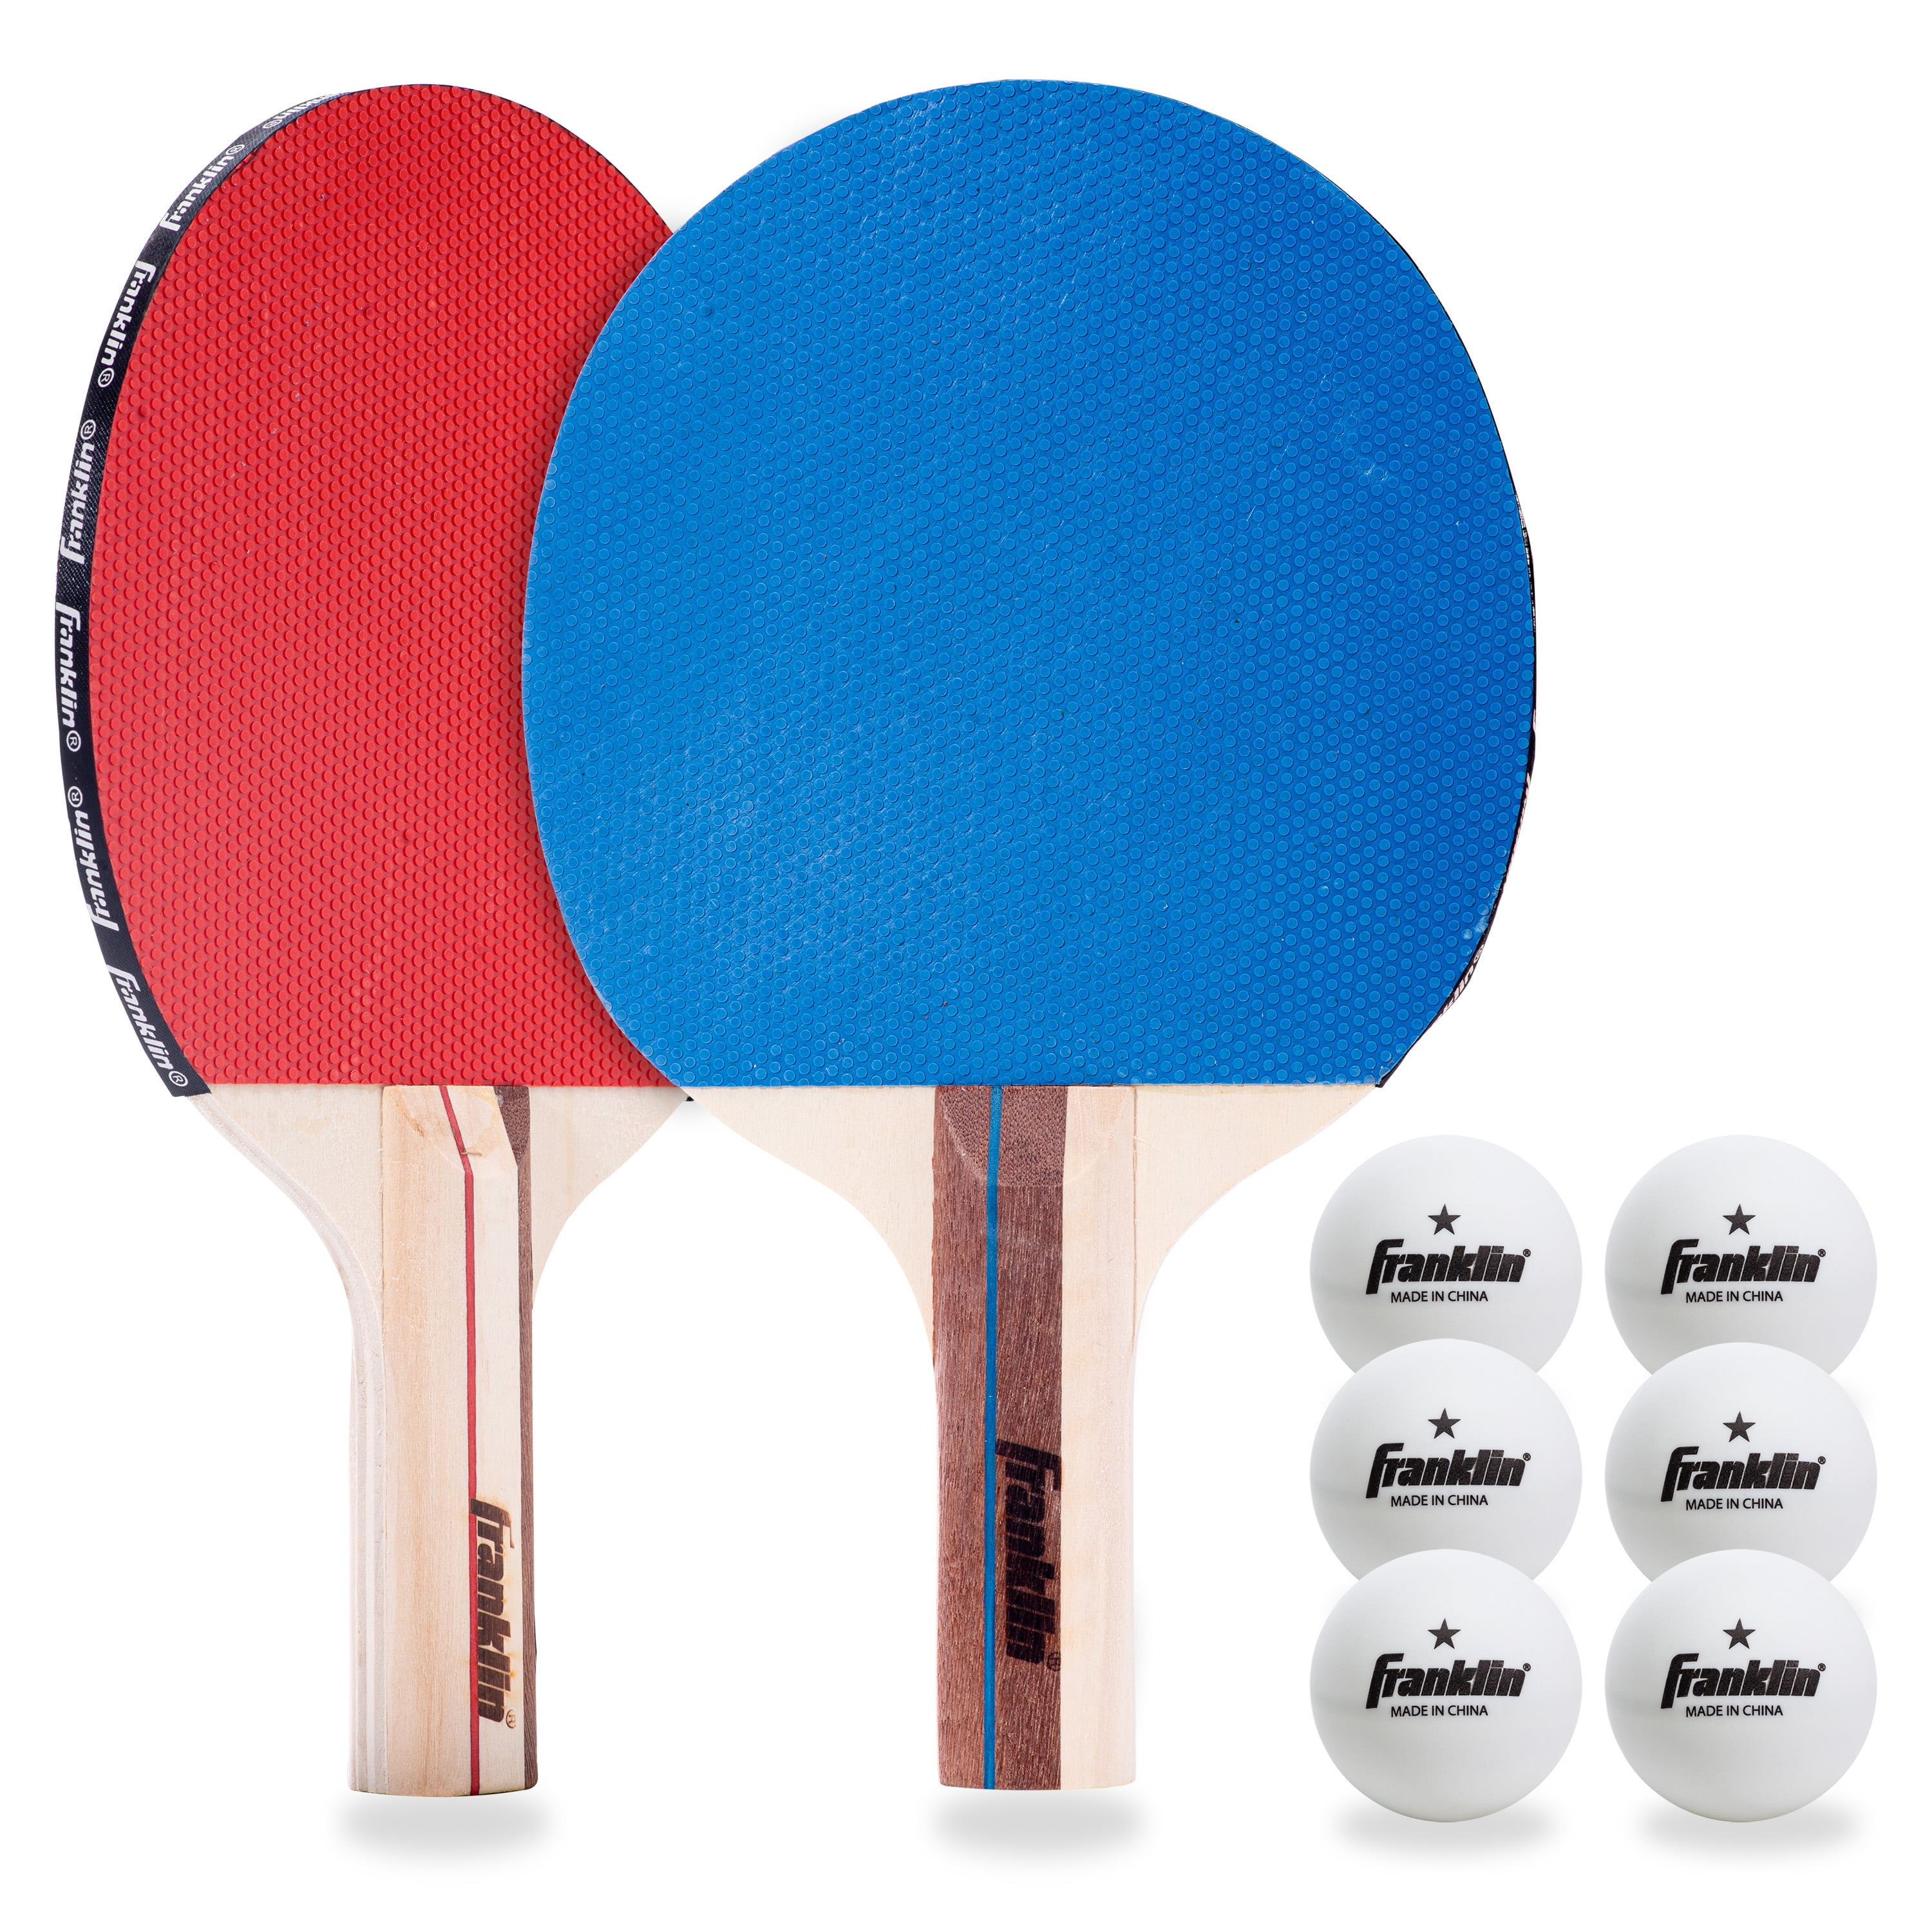 Penn 4.0 TOURNAMENT TABLE TENNIS PADDLERACKET Spin-8 Speed-7 Control-8 PLAY 